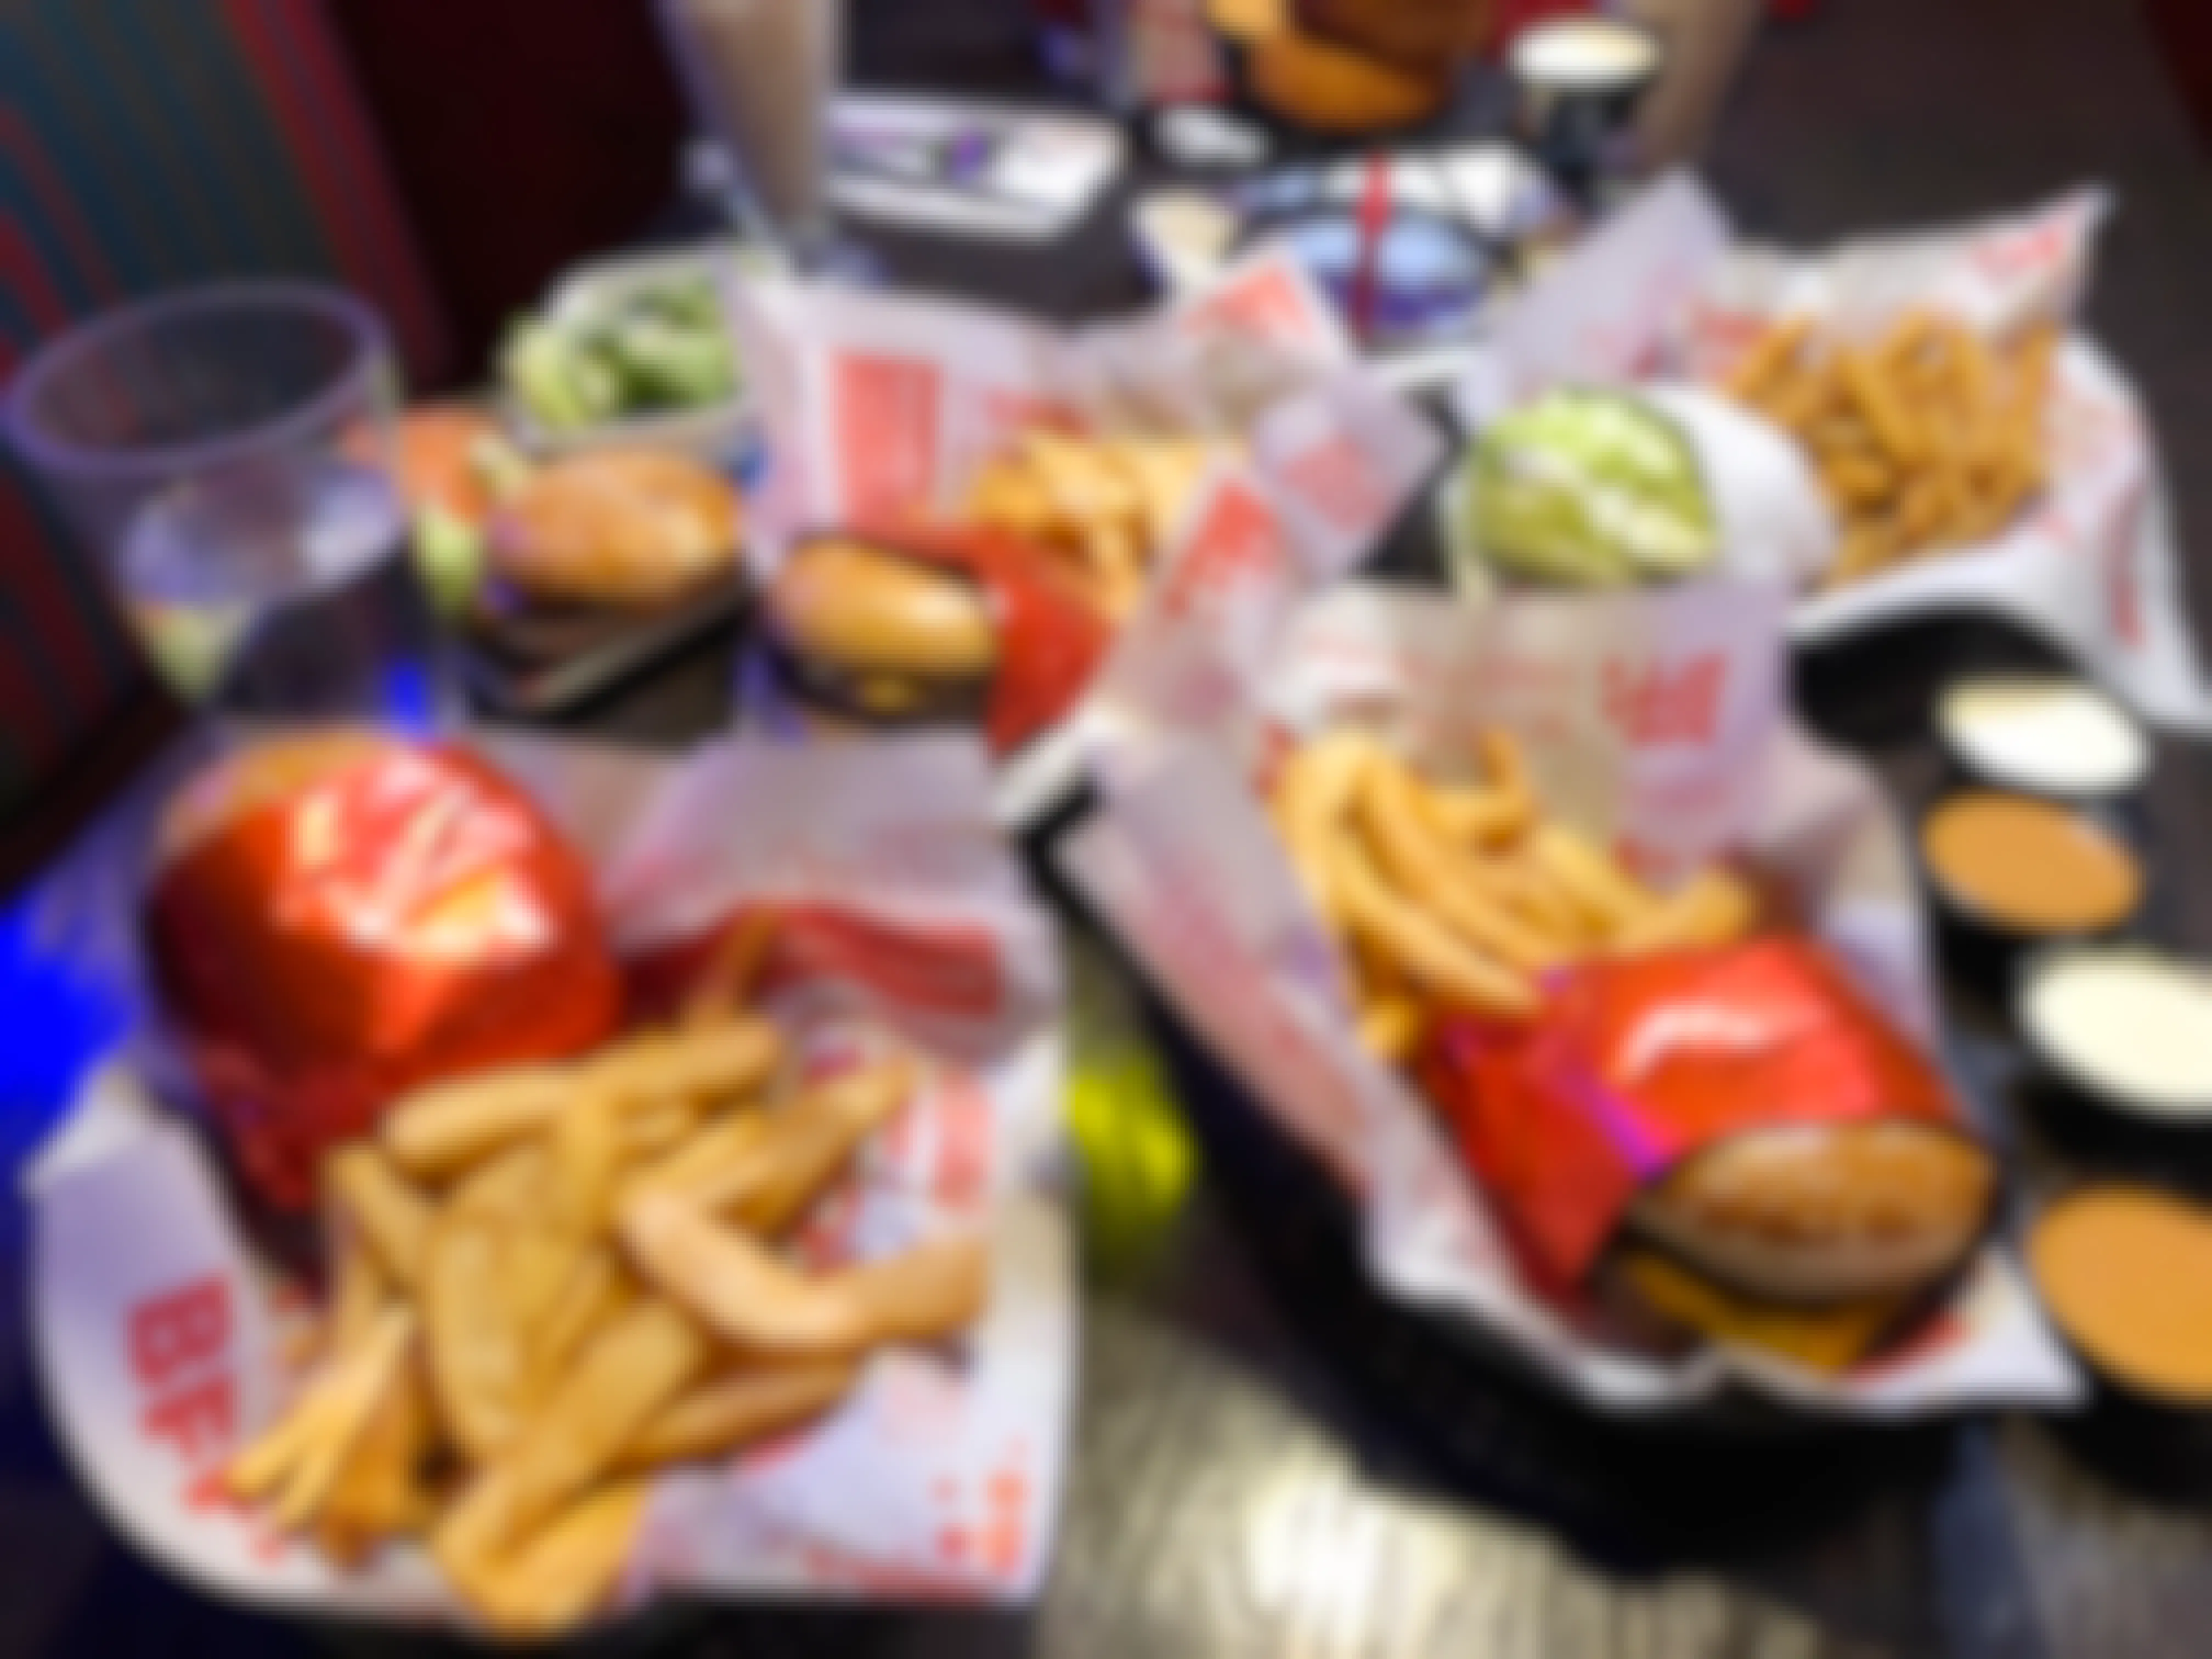 A table at Red Robin with multiple plates of food, including burgers, fries, broccoli, a tower of onion rings, a milkshake, and several dipping cups.